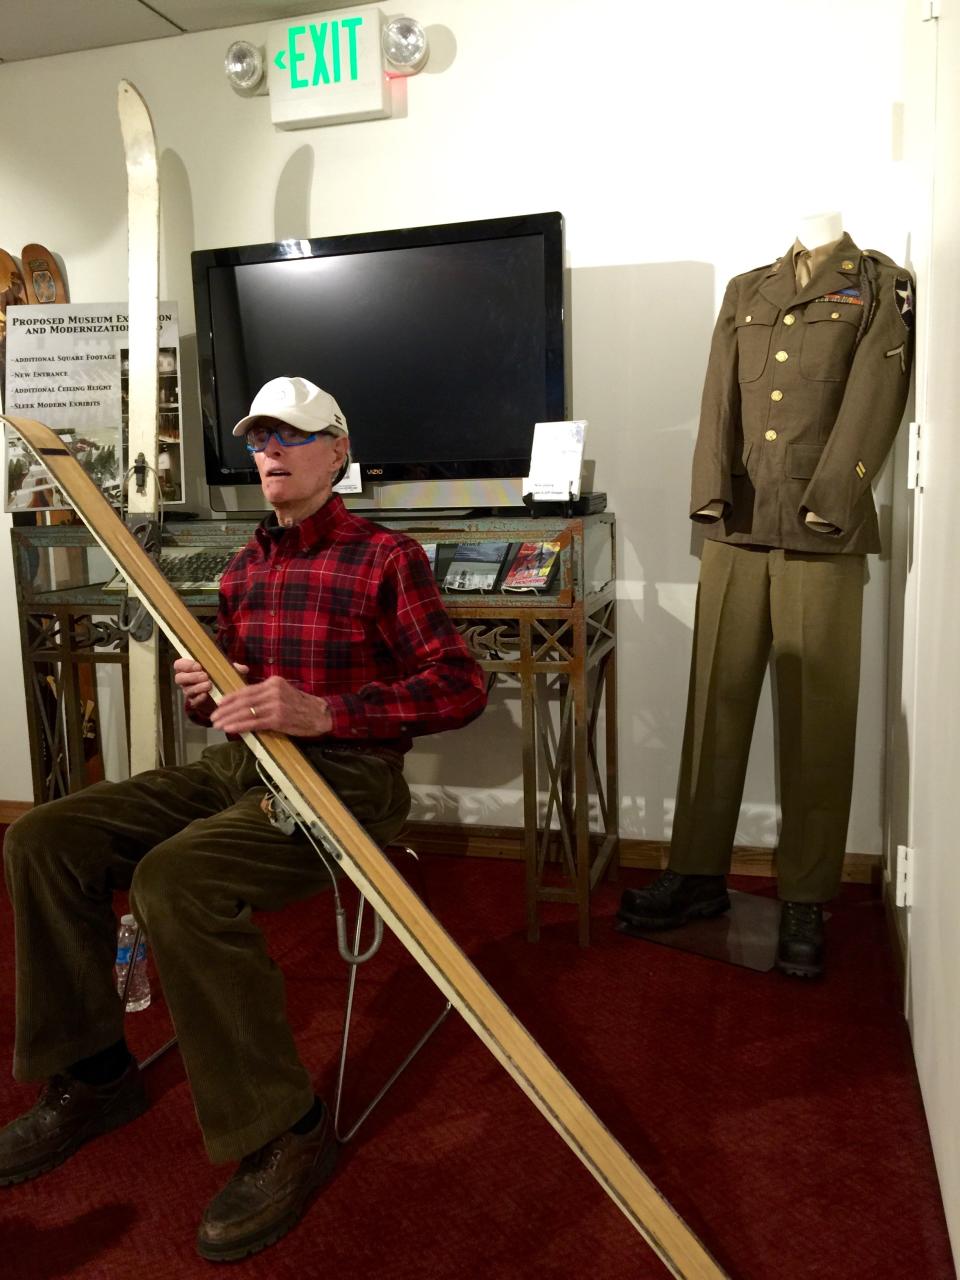 Sandy Treat shows off a 7-foot-long hickory ski of the kind he used while fighting and training with the 10th Mountain Division in Colorado. Treat, now 92, was 19 years old when he volunteered to join the Army and help create the first true mountain division, which fought in Italy to dislodge Germans from mountain passes.